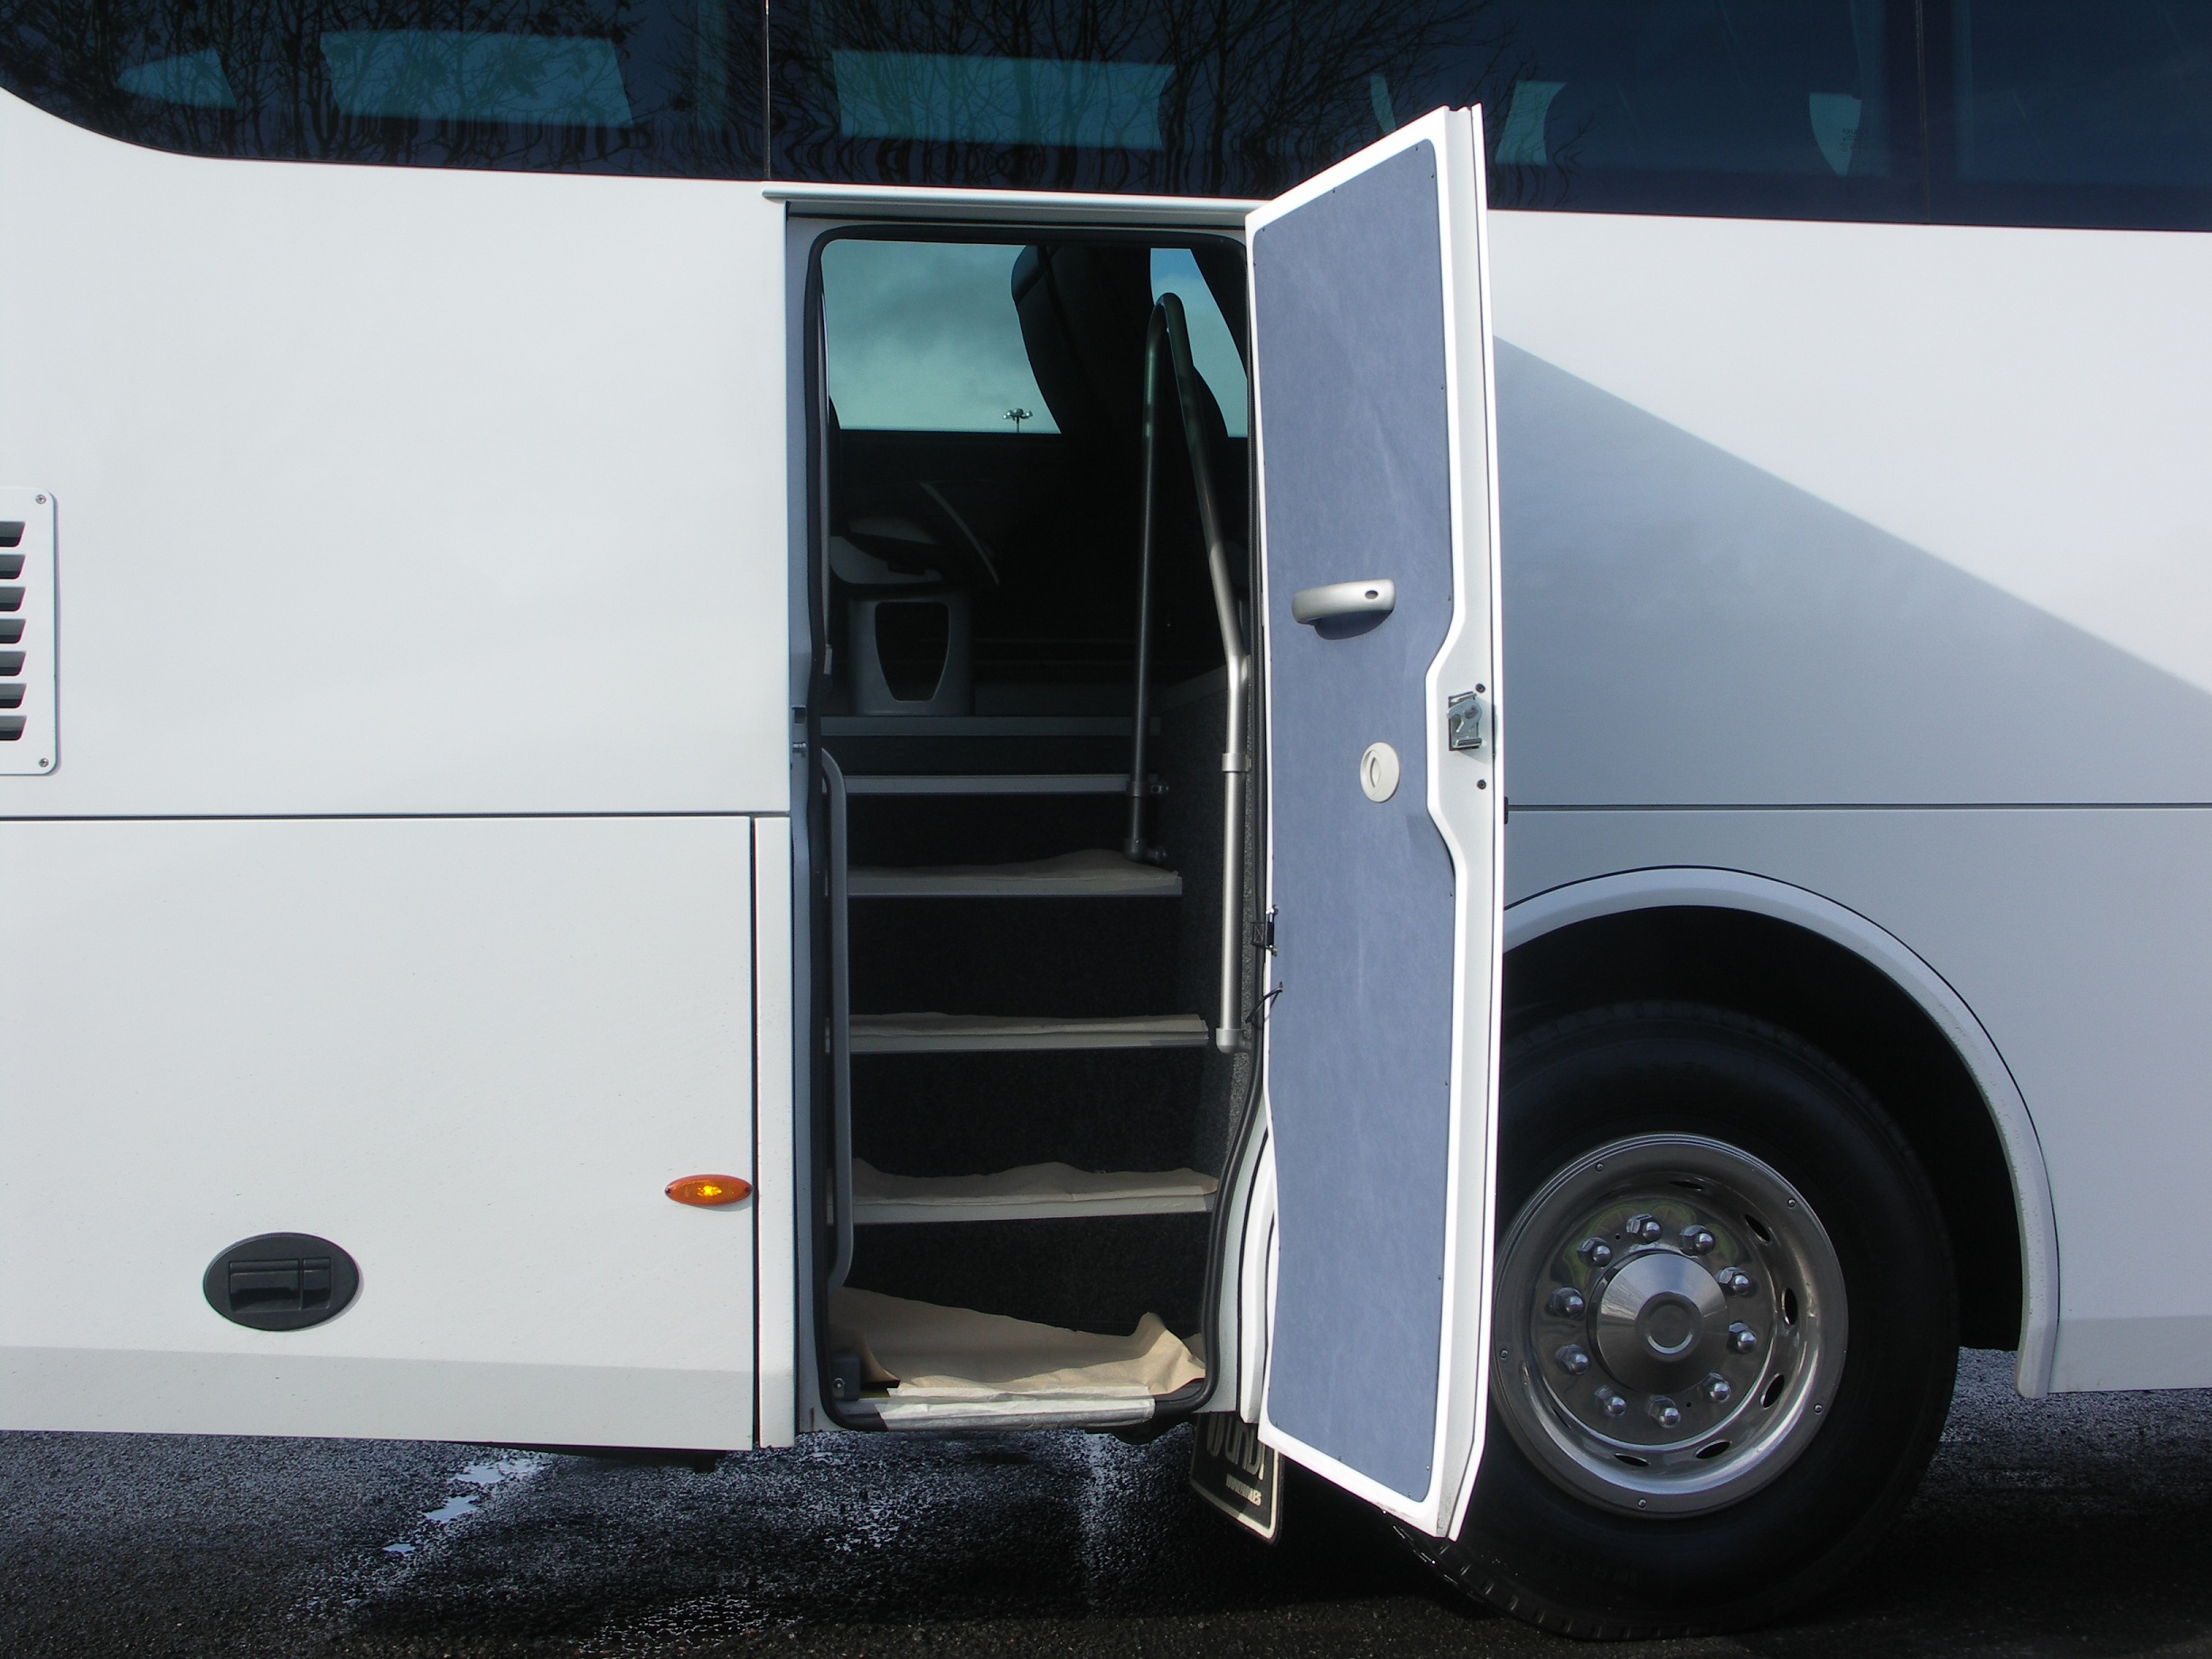 DVSA issues reminder about importance of checks of emergency doors